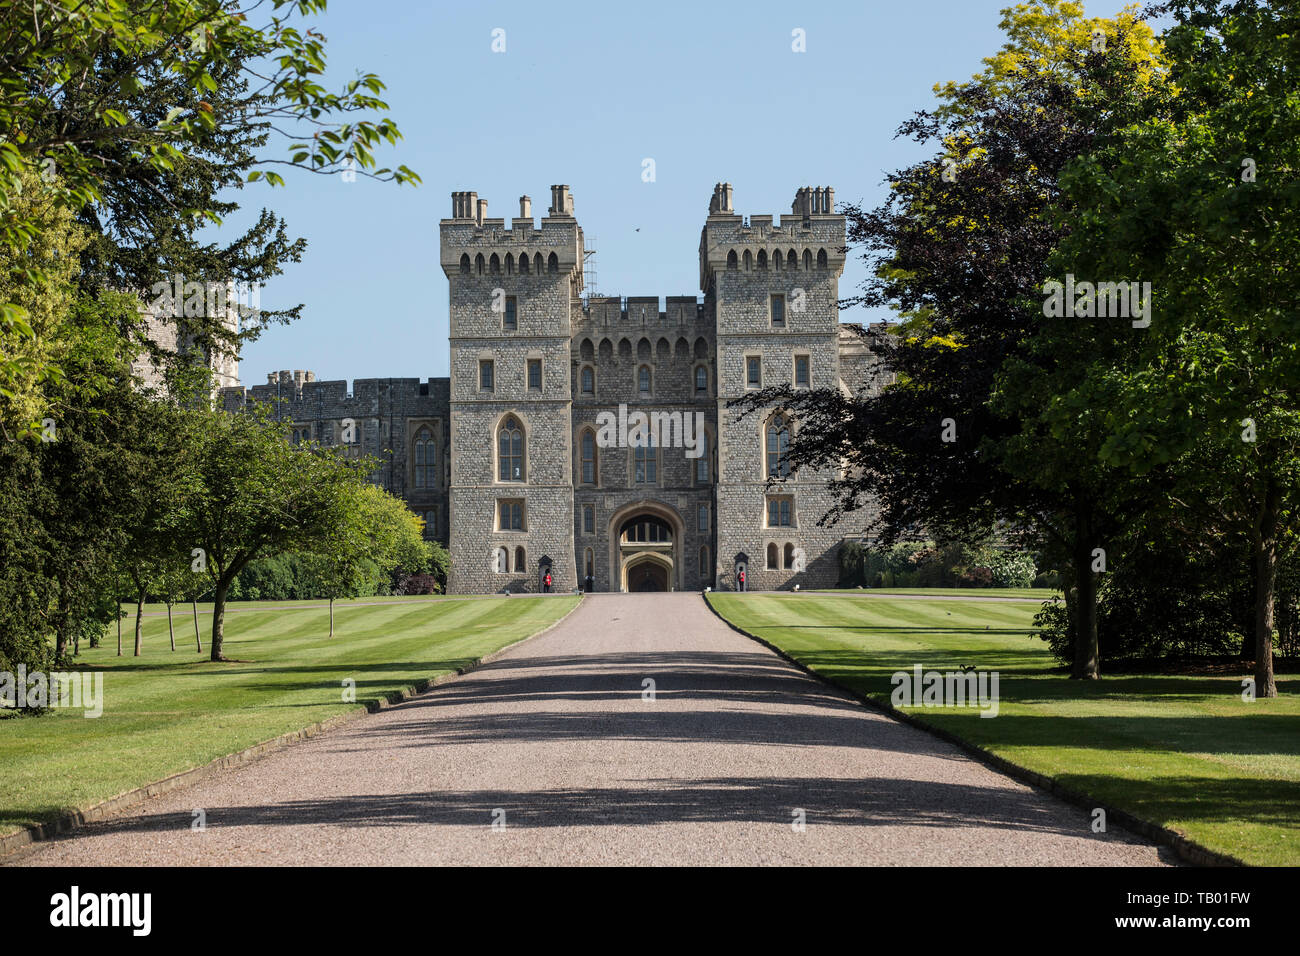 Windsor, historic town and residence to the Royal Family at Windsor Castle built by William The Conqueror, located in the southeast of England, UK Stock Photo